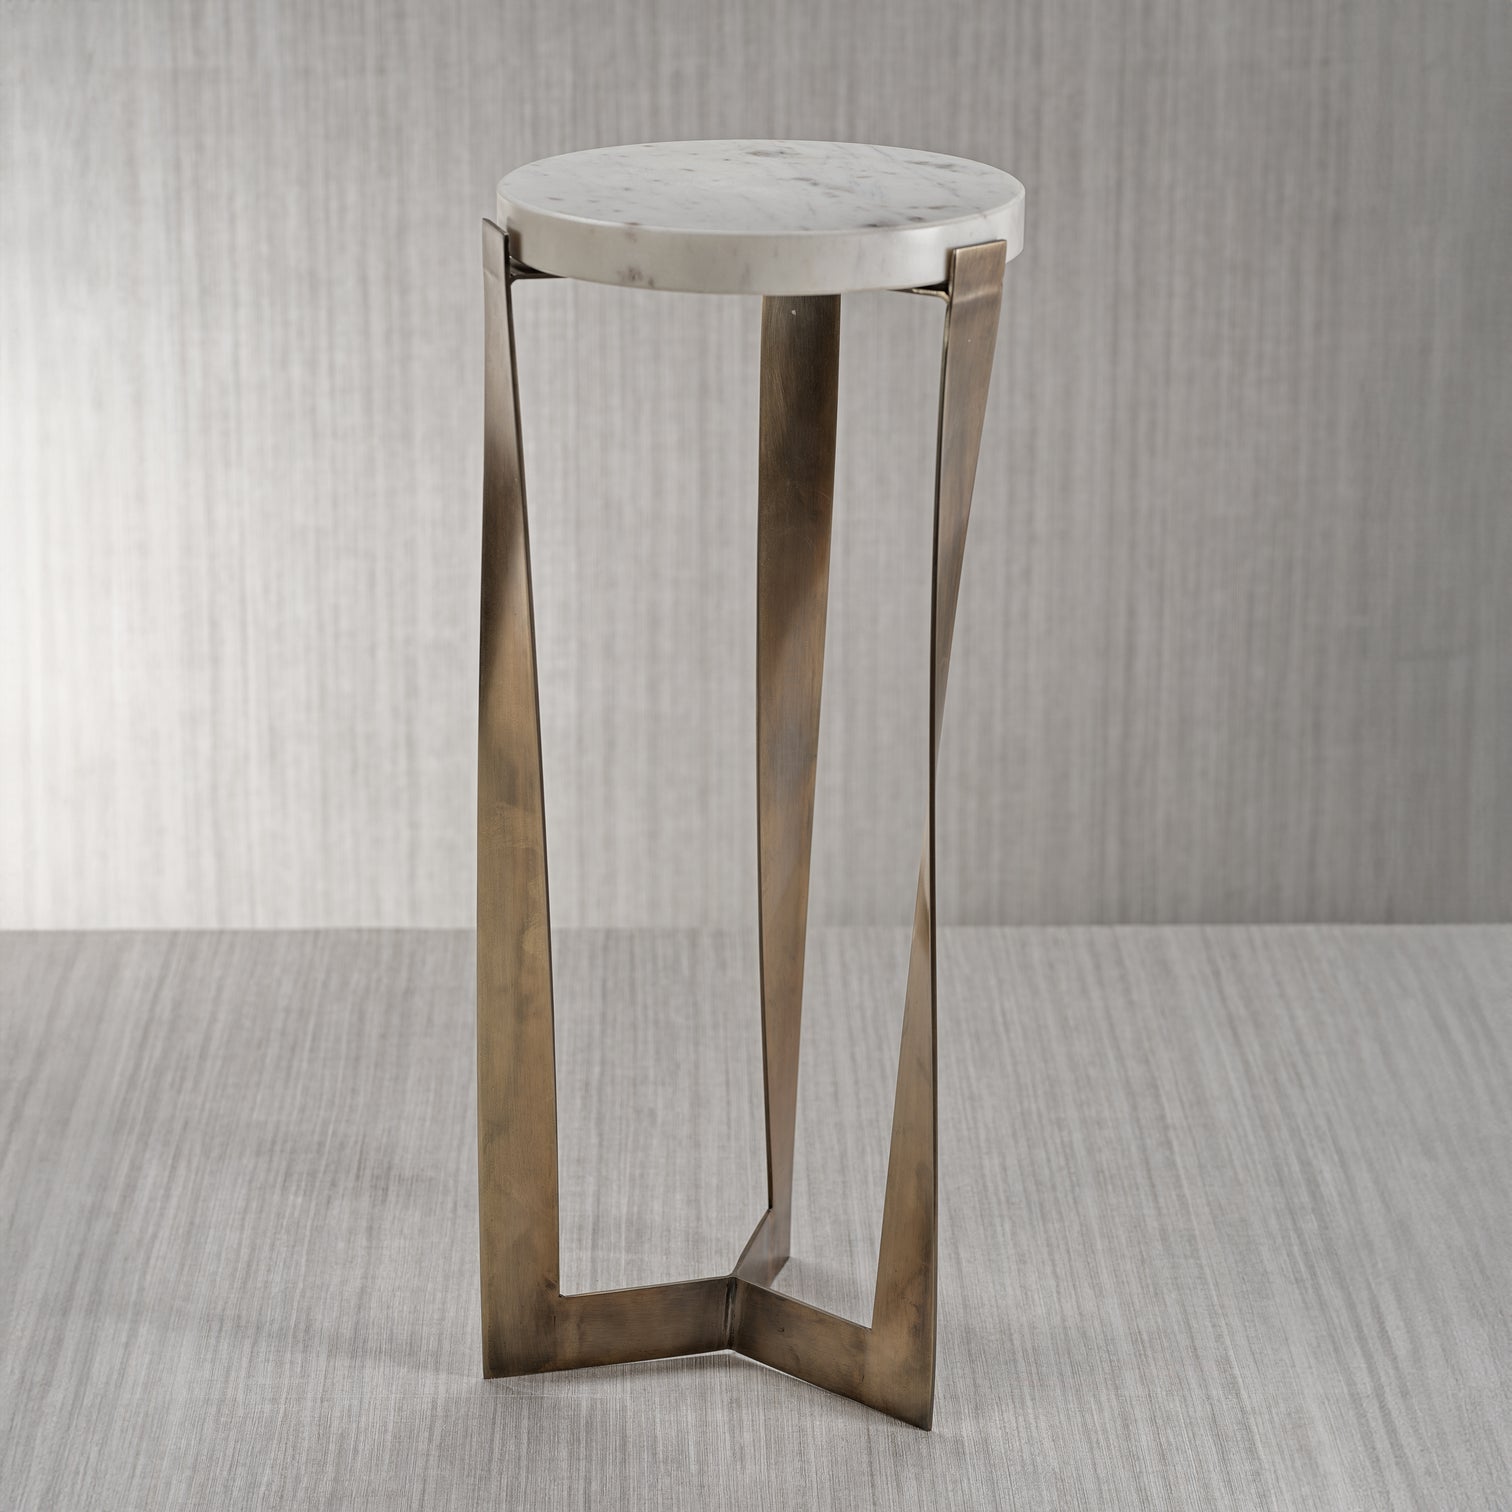 Costa Marble on Antique Brass Cocktail Table